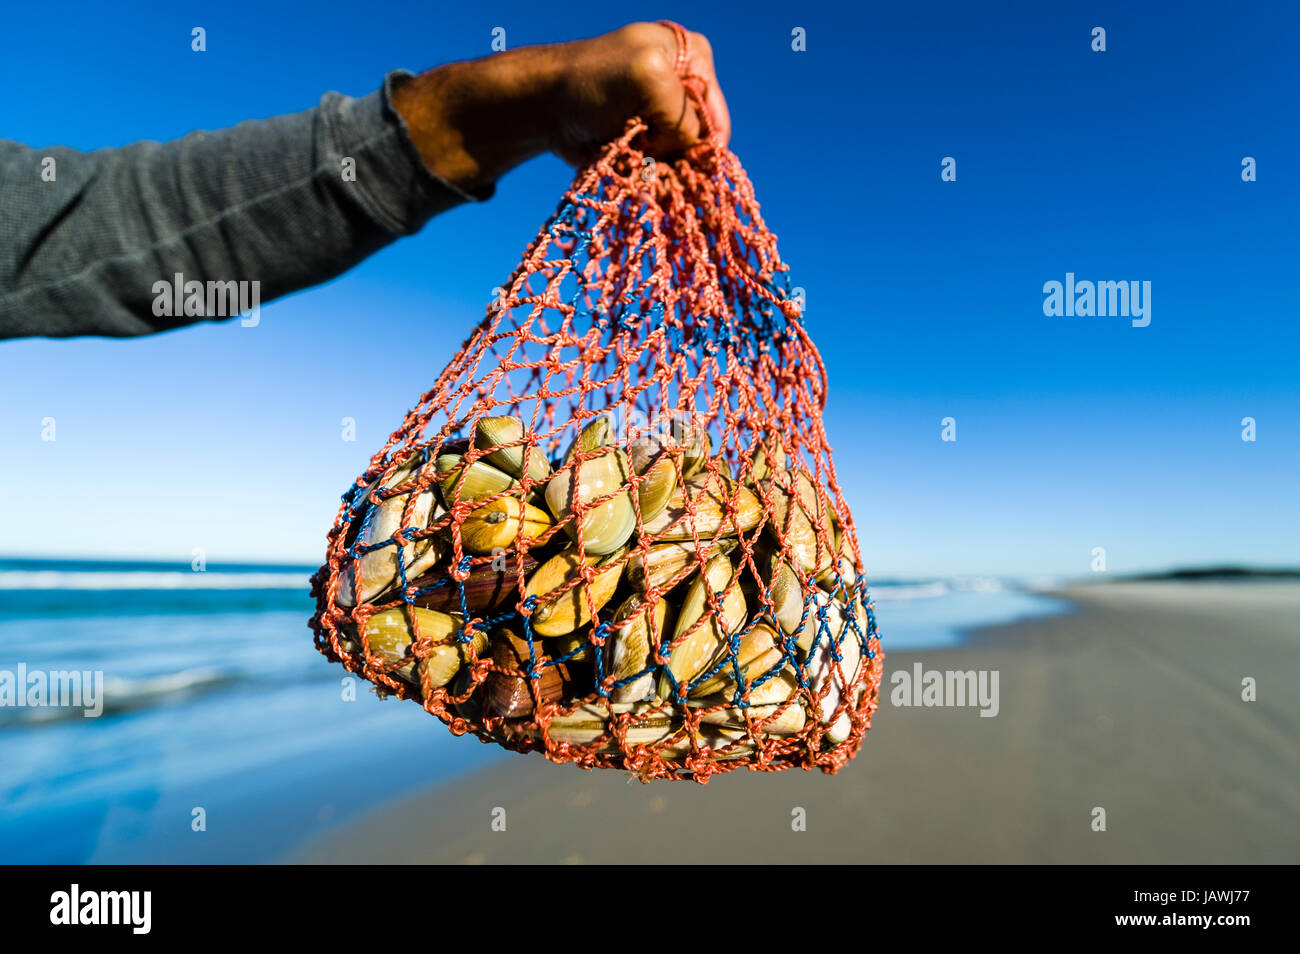 A woven bag carrying bi-valve shells called pipi harvested on a beach. Stock Photo